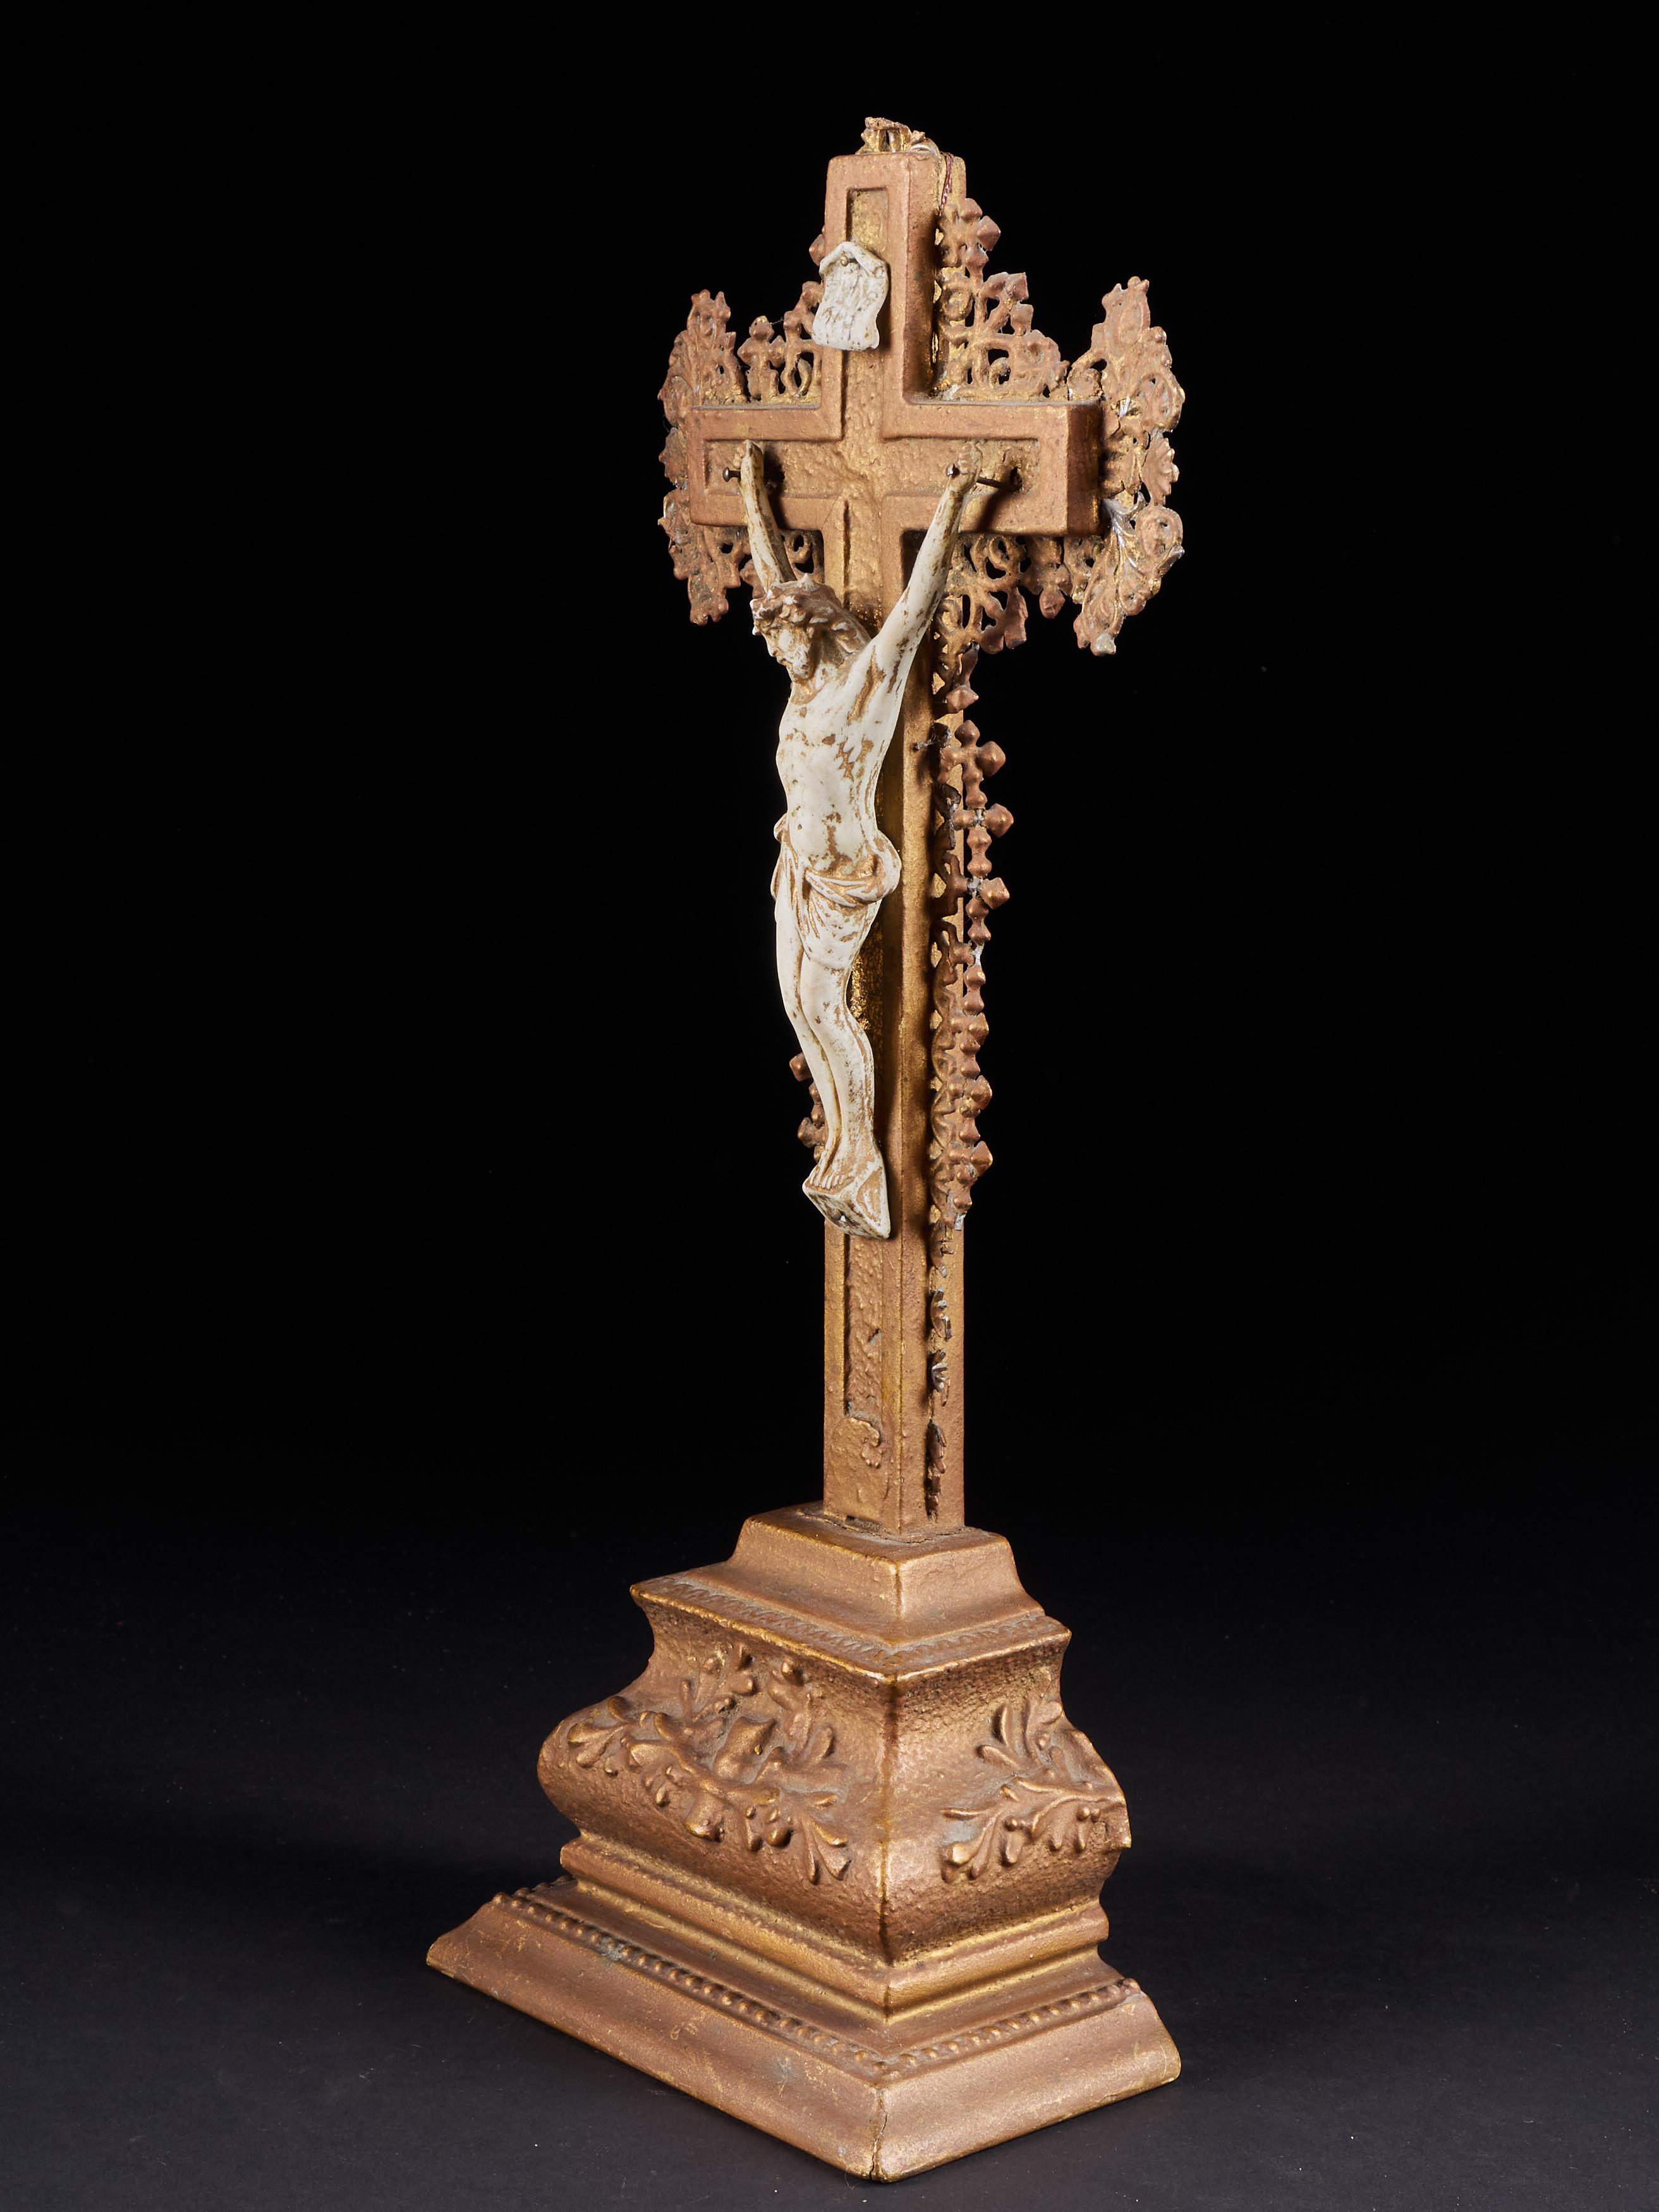 Elegant standing crucifix and Jesus made of resin with gold finish. A genuine antique with metal ornaments and a cross made of plaster which should fill interiors with character.